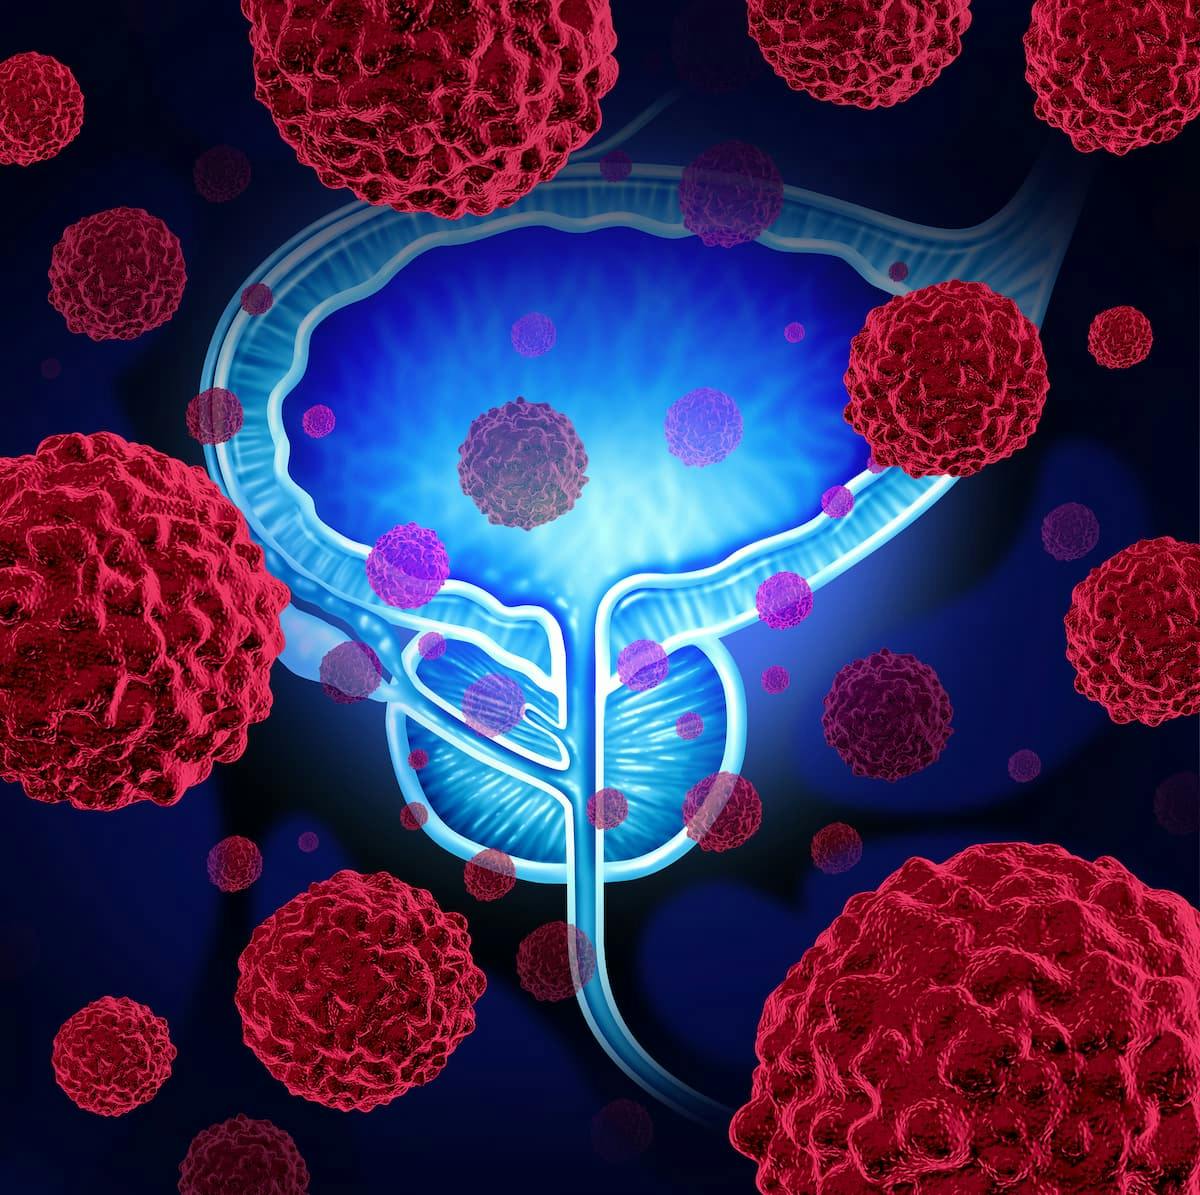 A post hoc analysis of the phase 3 TITAN trial highlights an association between PSA decline and survival among patients with metastatic castration-sensitive prostate cancer who were treated with apalutamide plus androgen deprivation therapy.